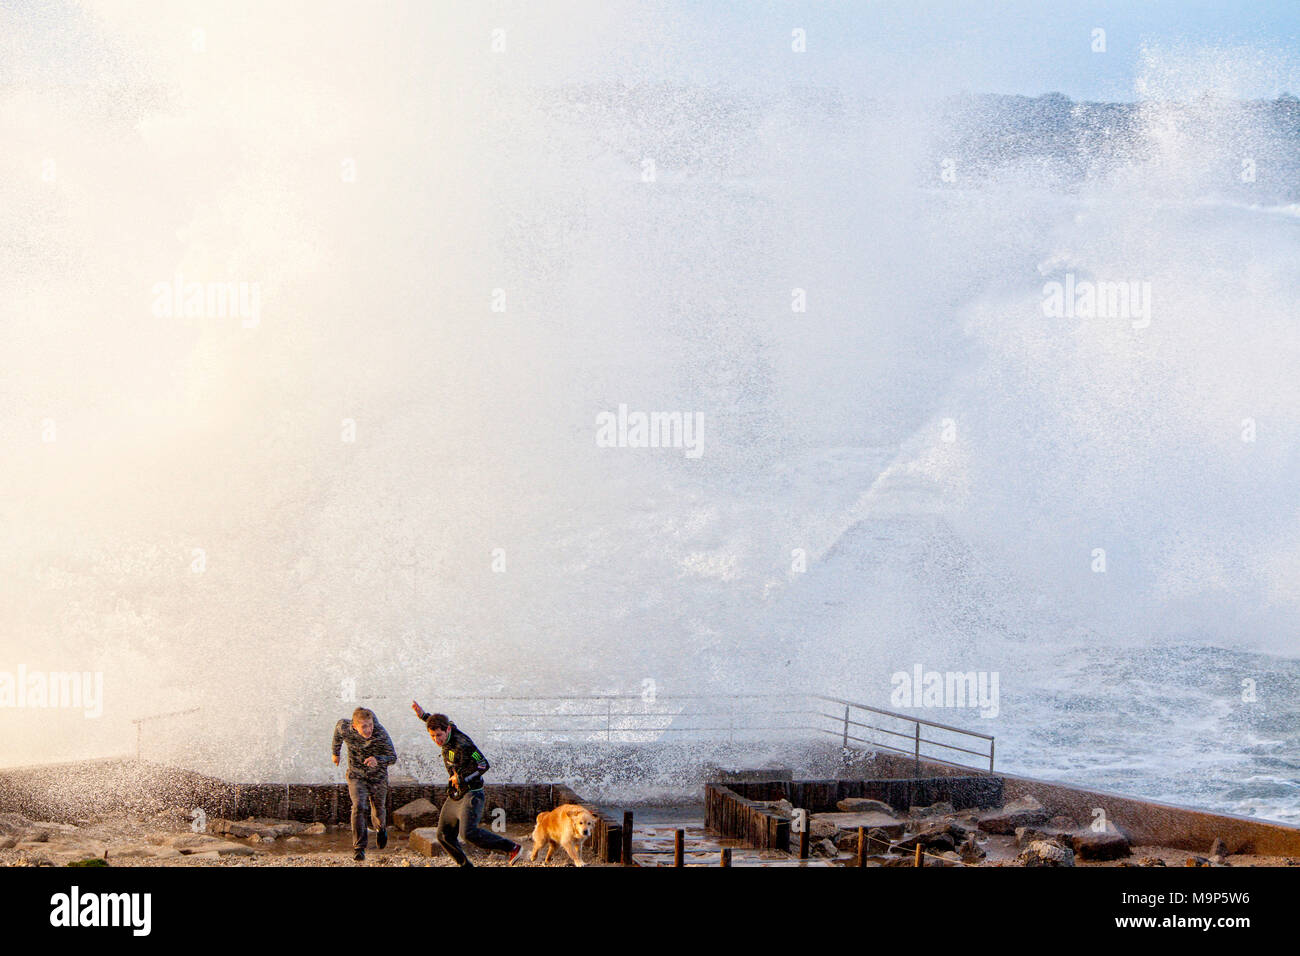 Boys and dog playing with waves during storm, Kerroch, Brittany, France Stock Photo